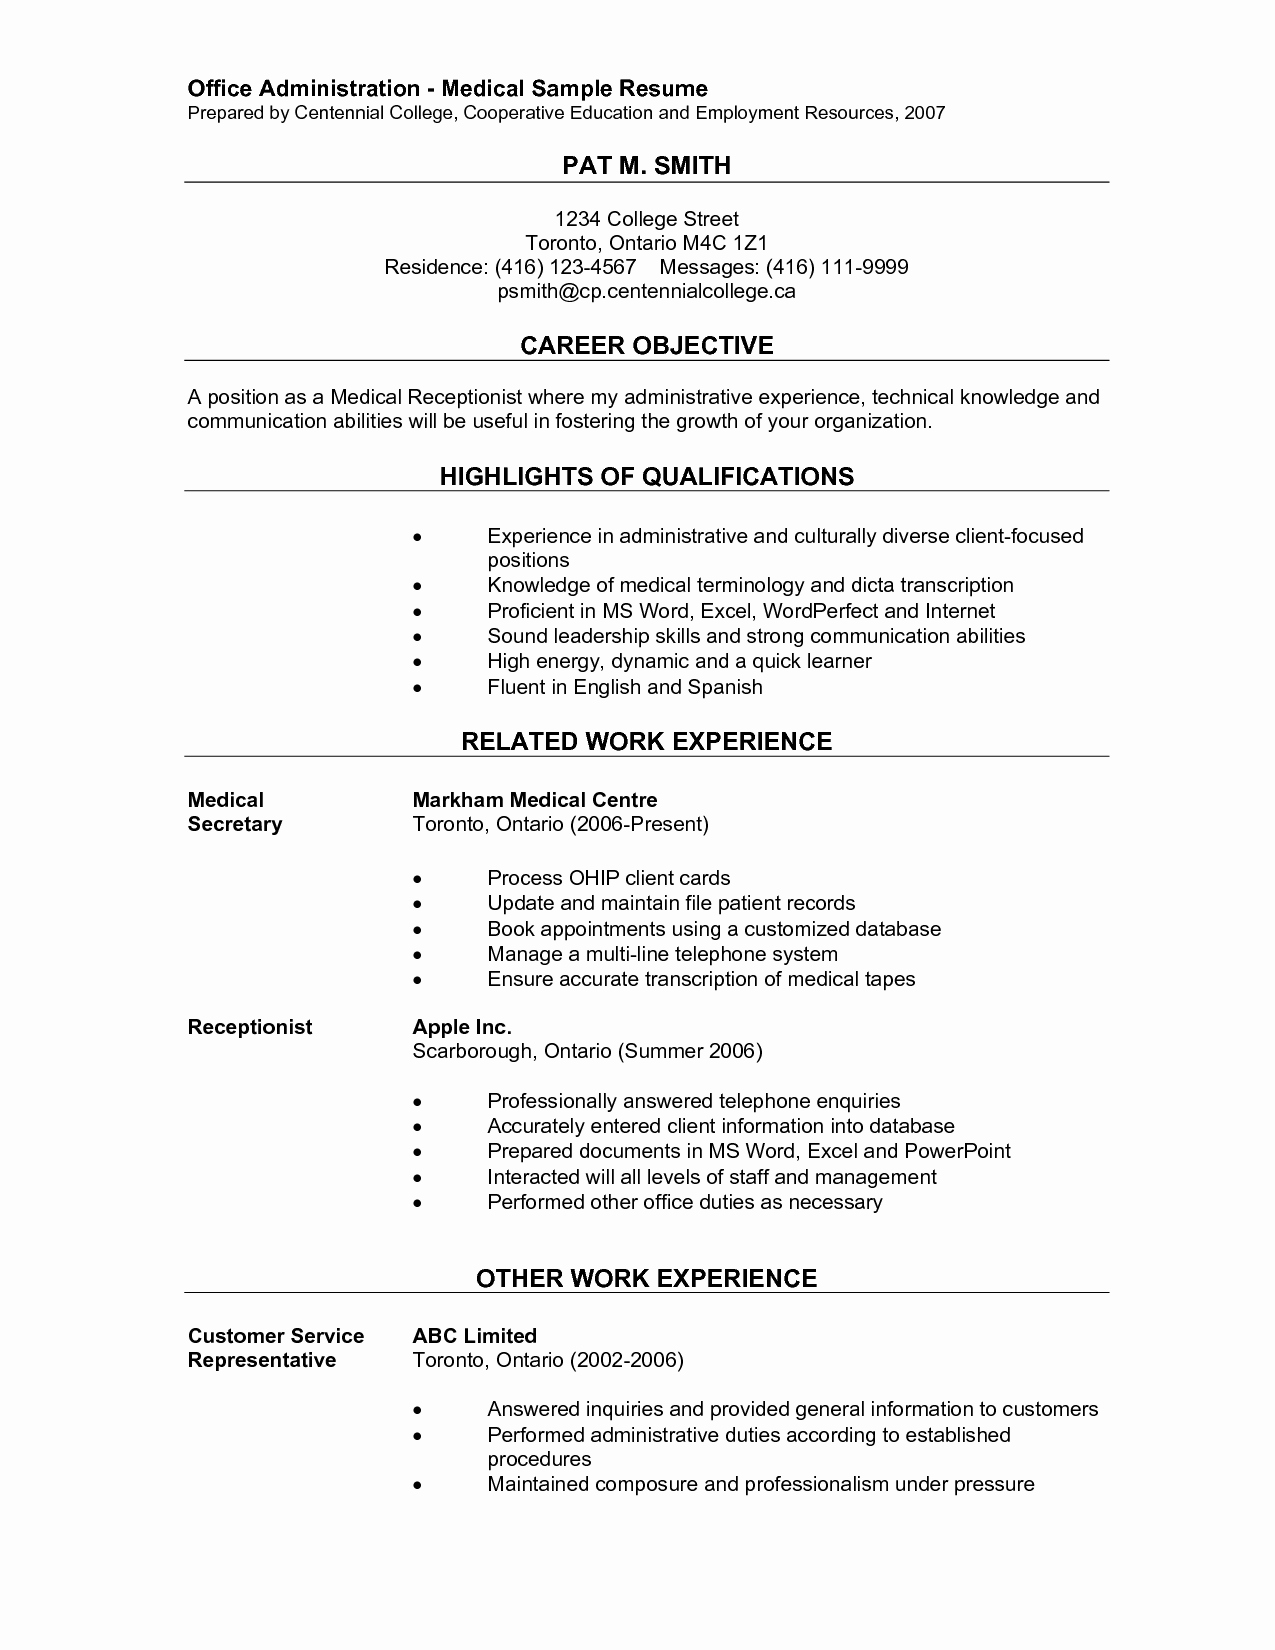 Office assistant Resume Template Luxury Fice Administration Medical Sample Resume Prepared